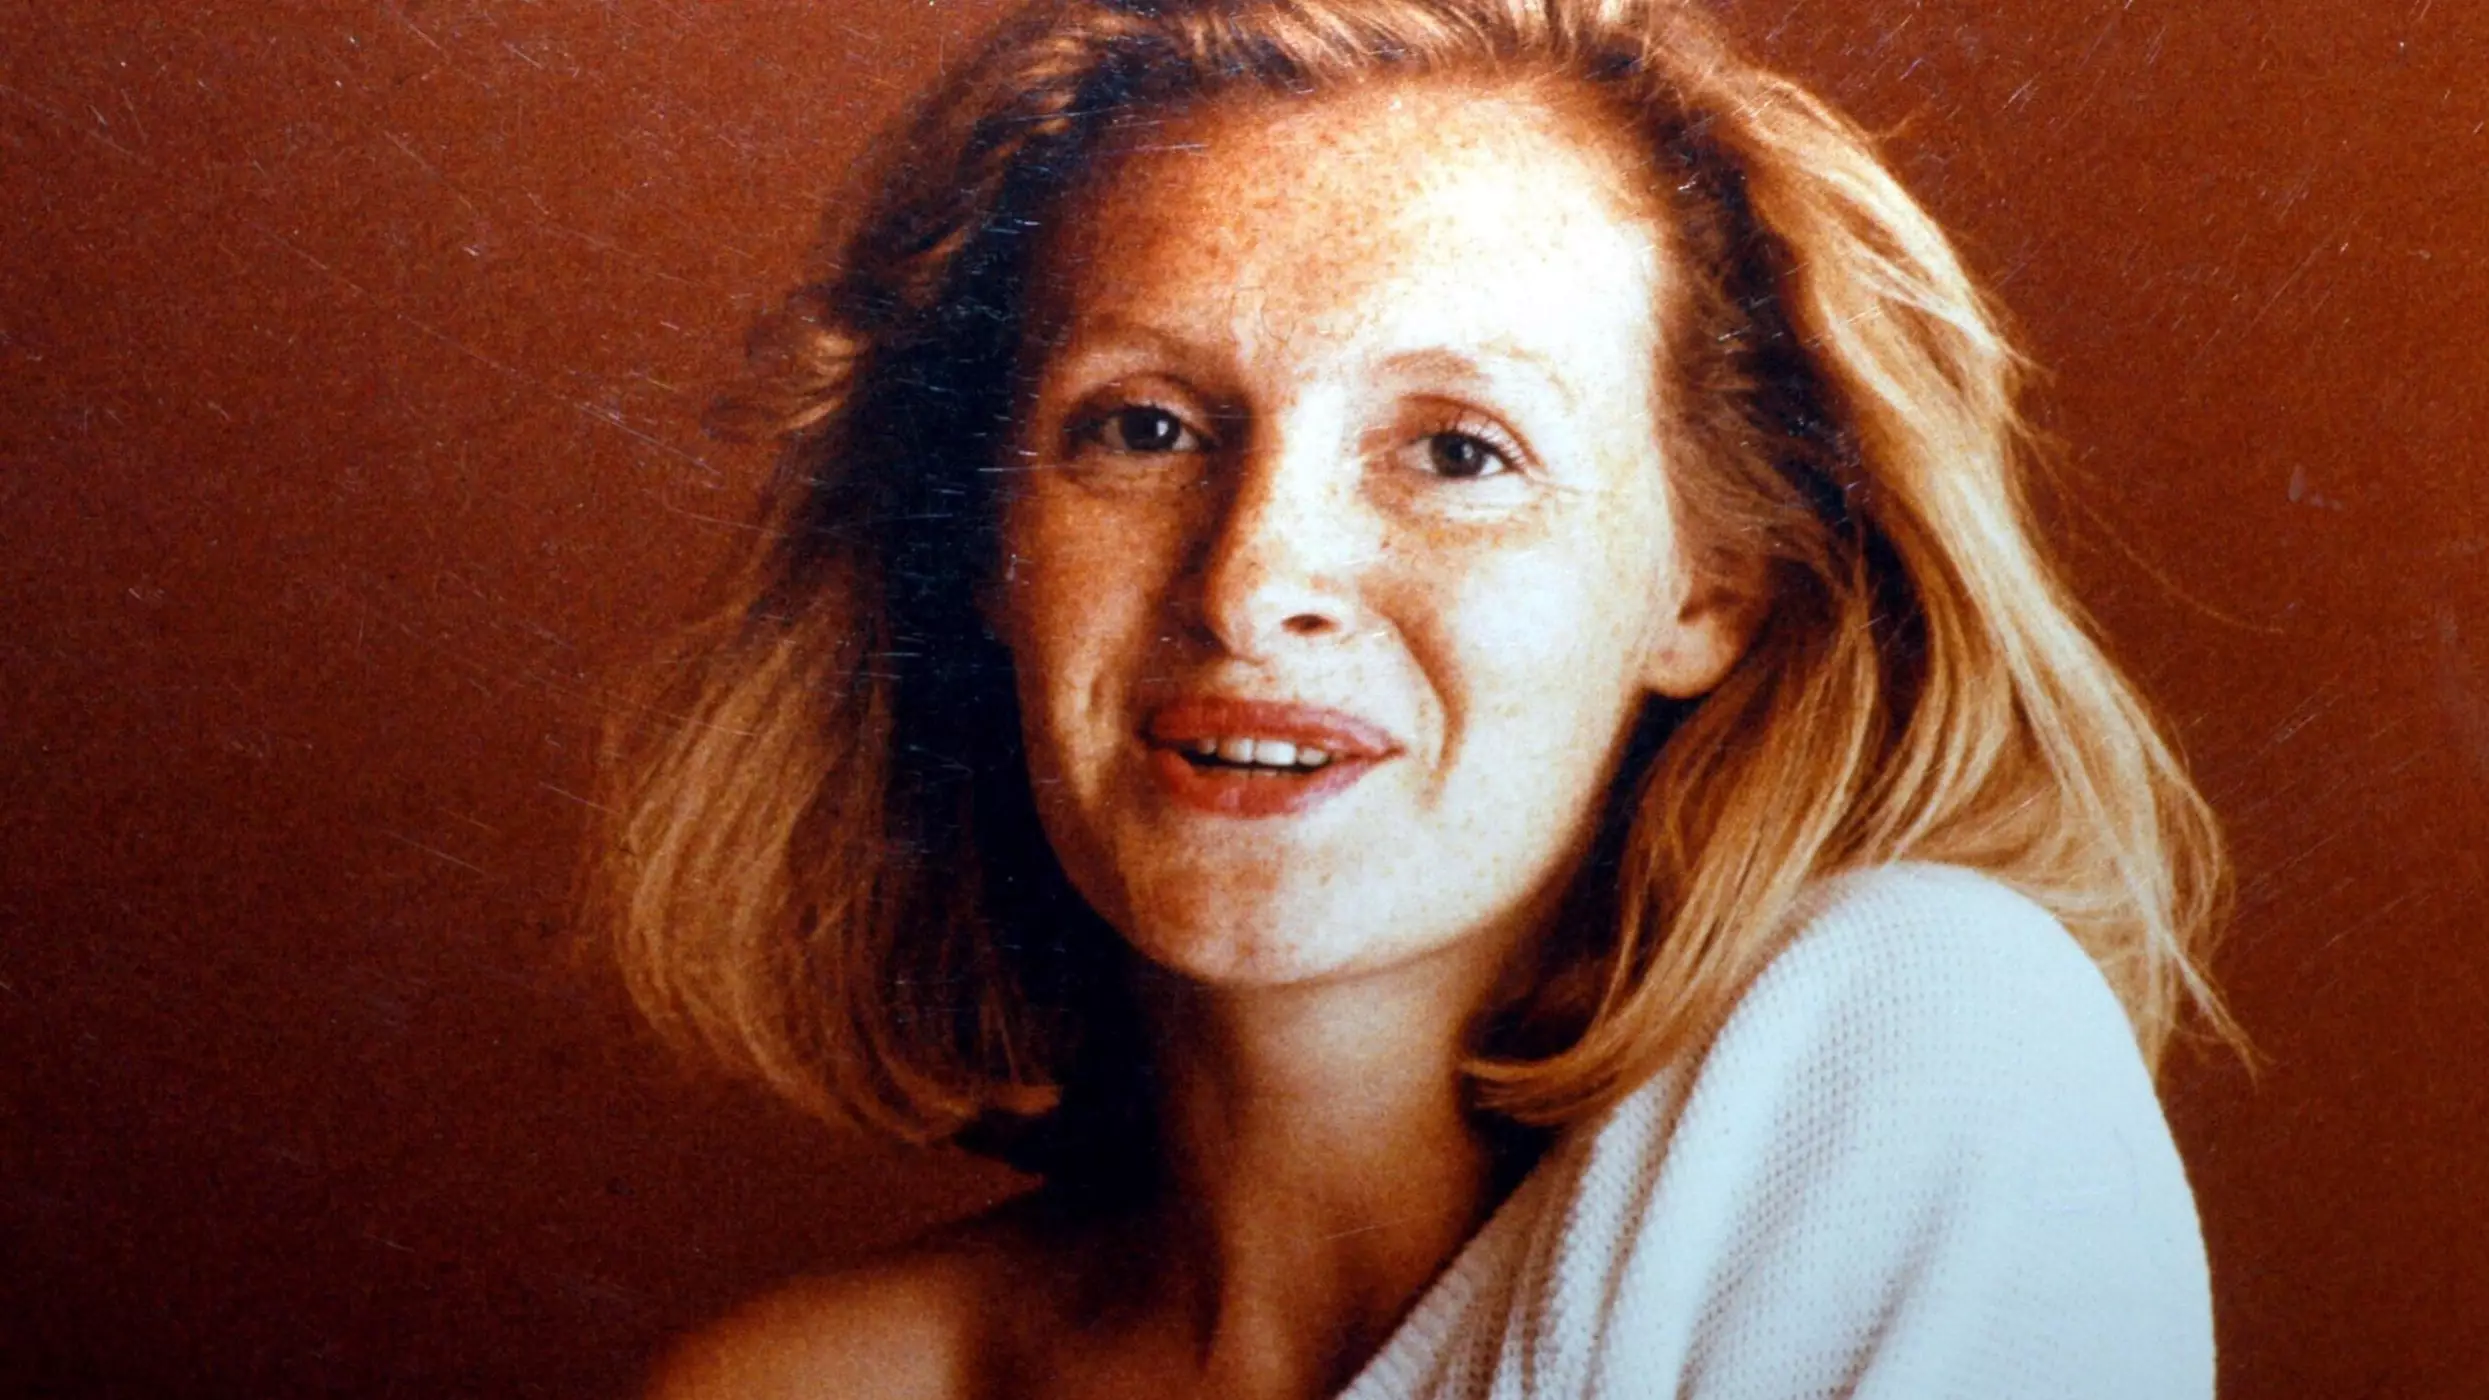 Sky and Netflix to make true crime documentaries about Sophie Toscan du Plantier